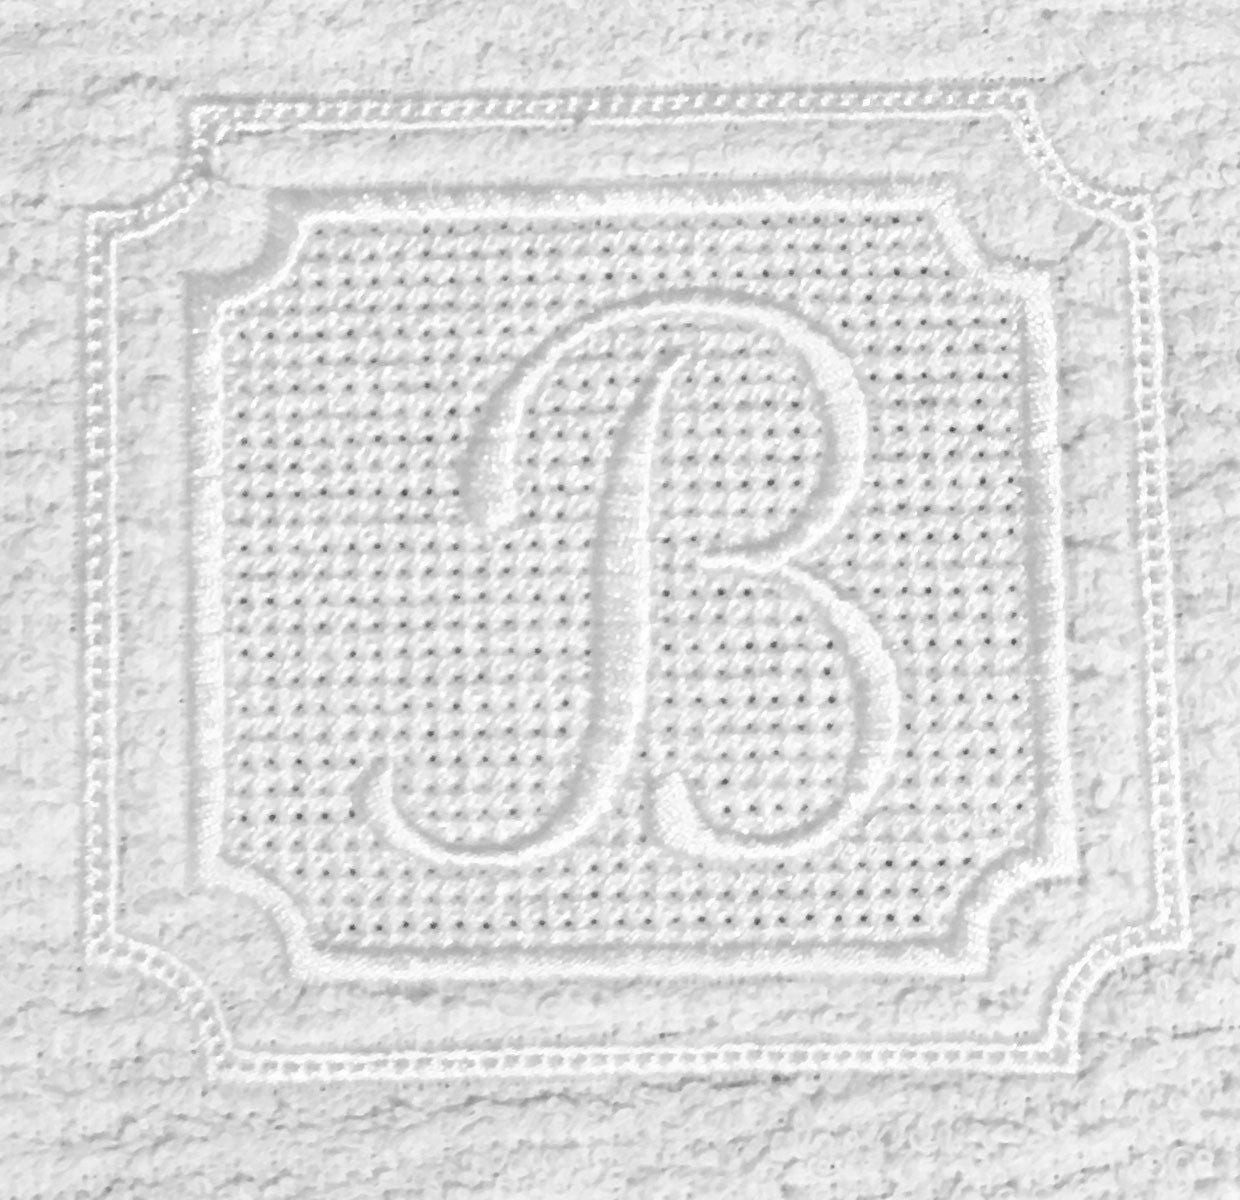 Double Square Embossed Embroidery Monogram Frame Instant 